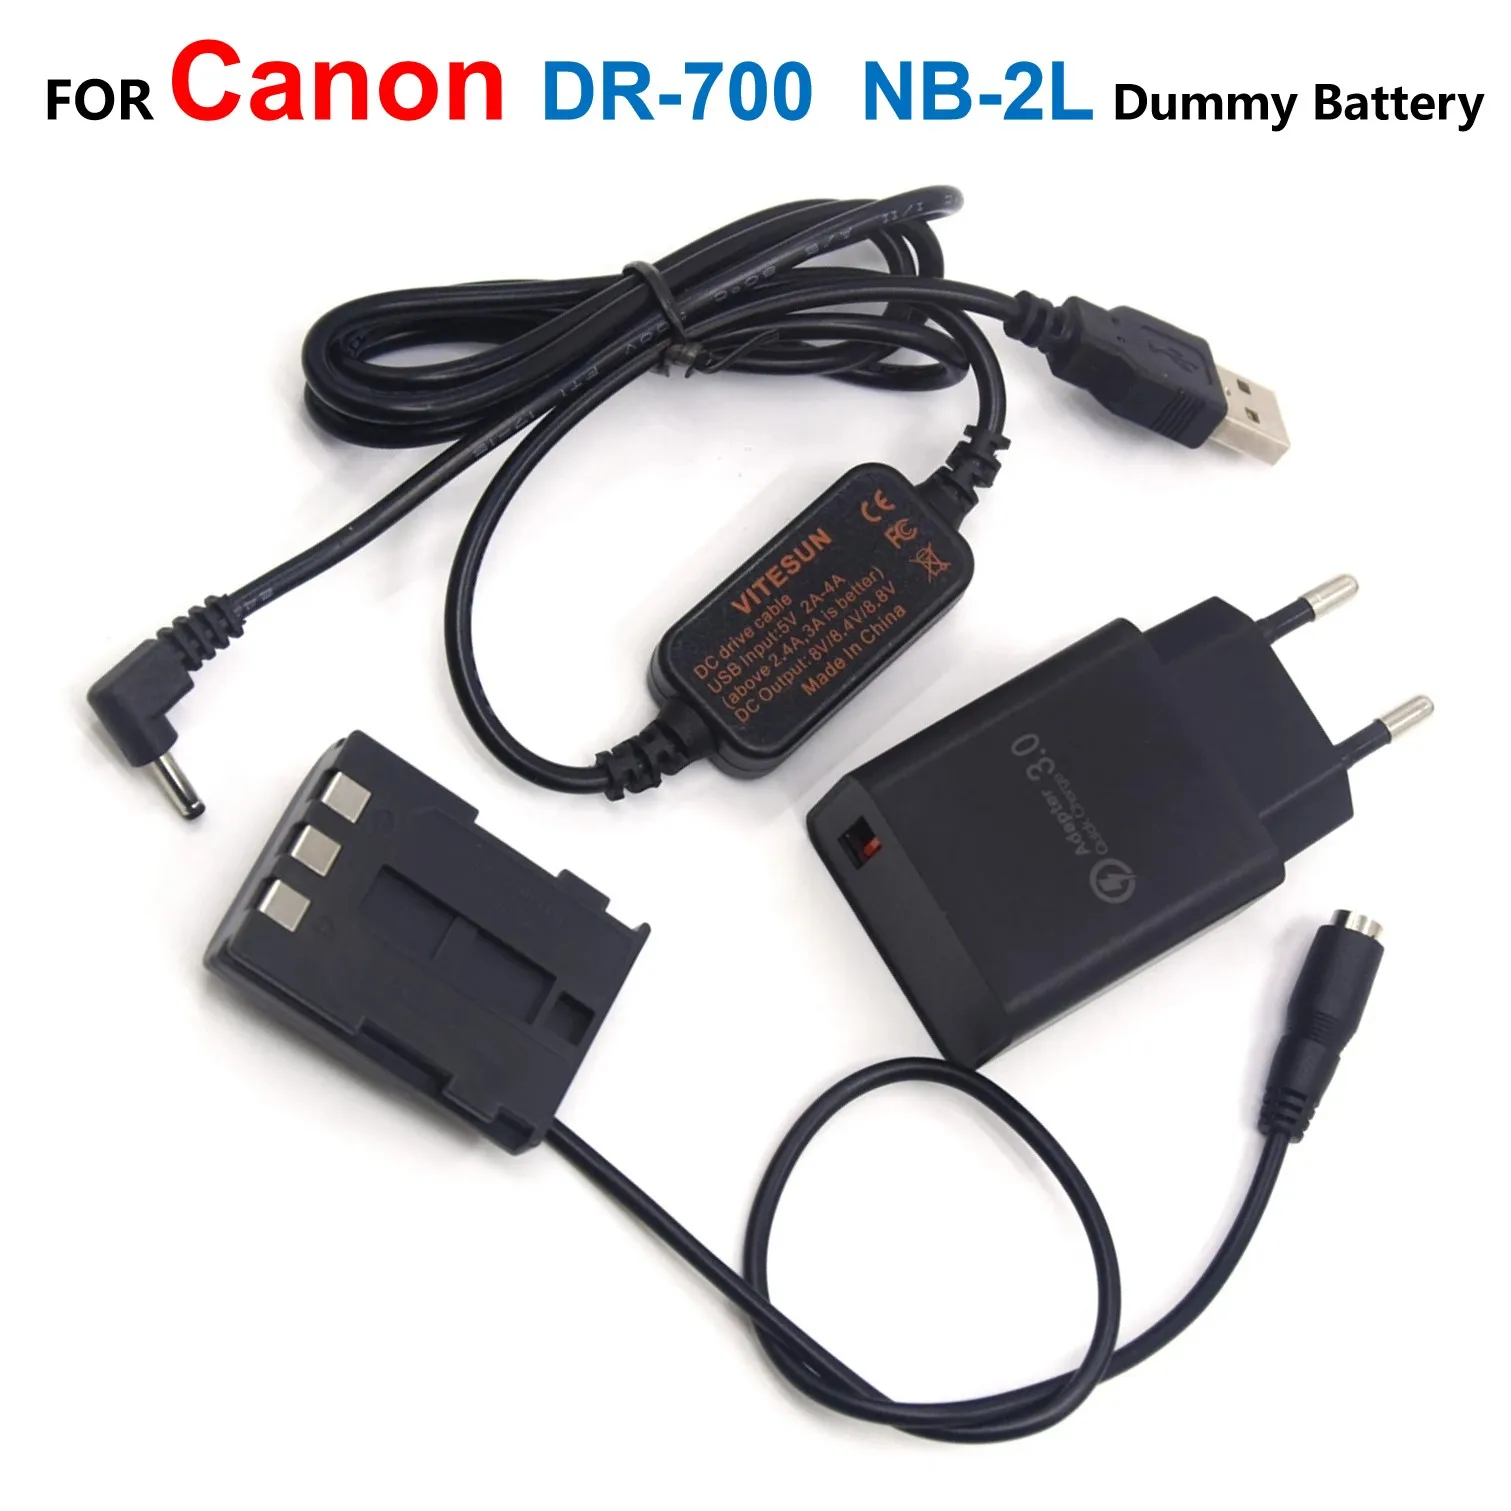 

DR-700 NB-2L 2LH Fake Battery+Power Bank USB Cable ACK-700+Charger For Canon S45 S60 S70 S80 S50 G7 G9 EOS 350D 400D Rebel XT